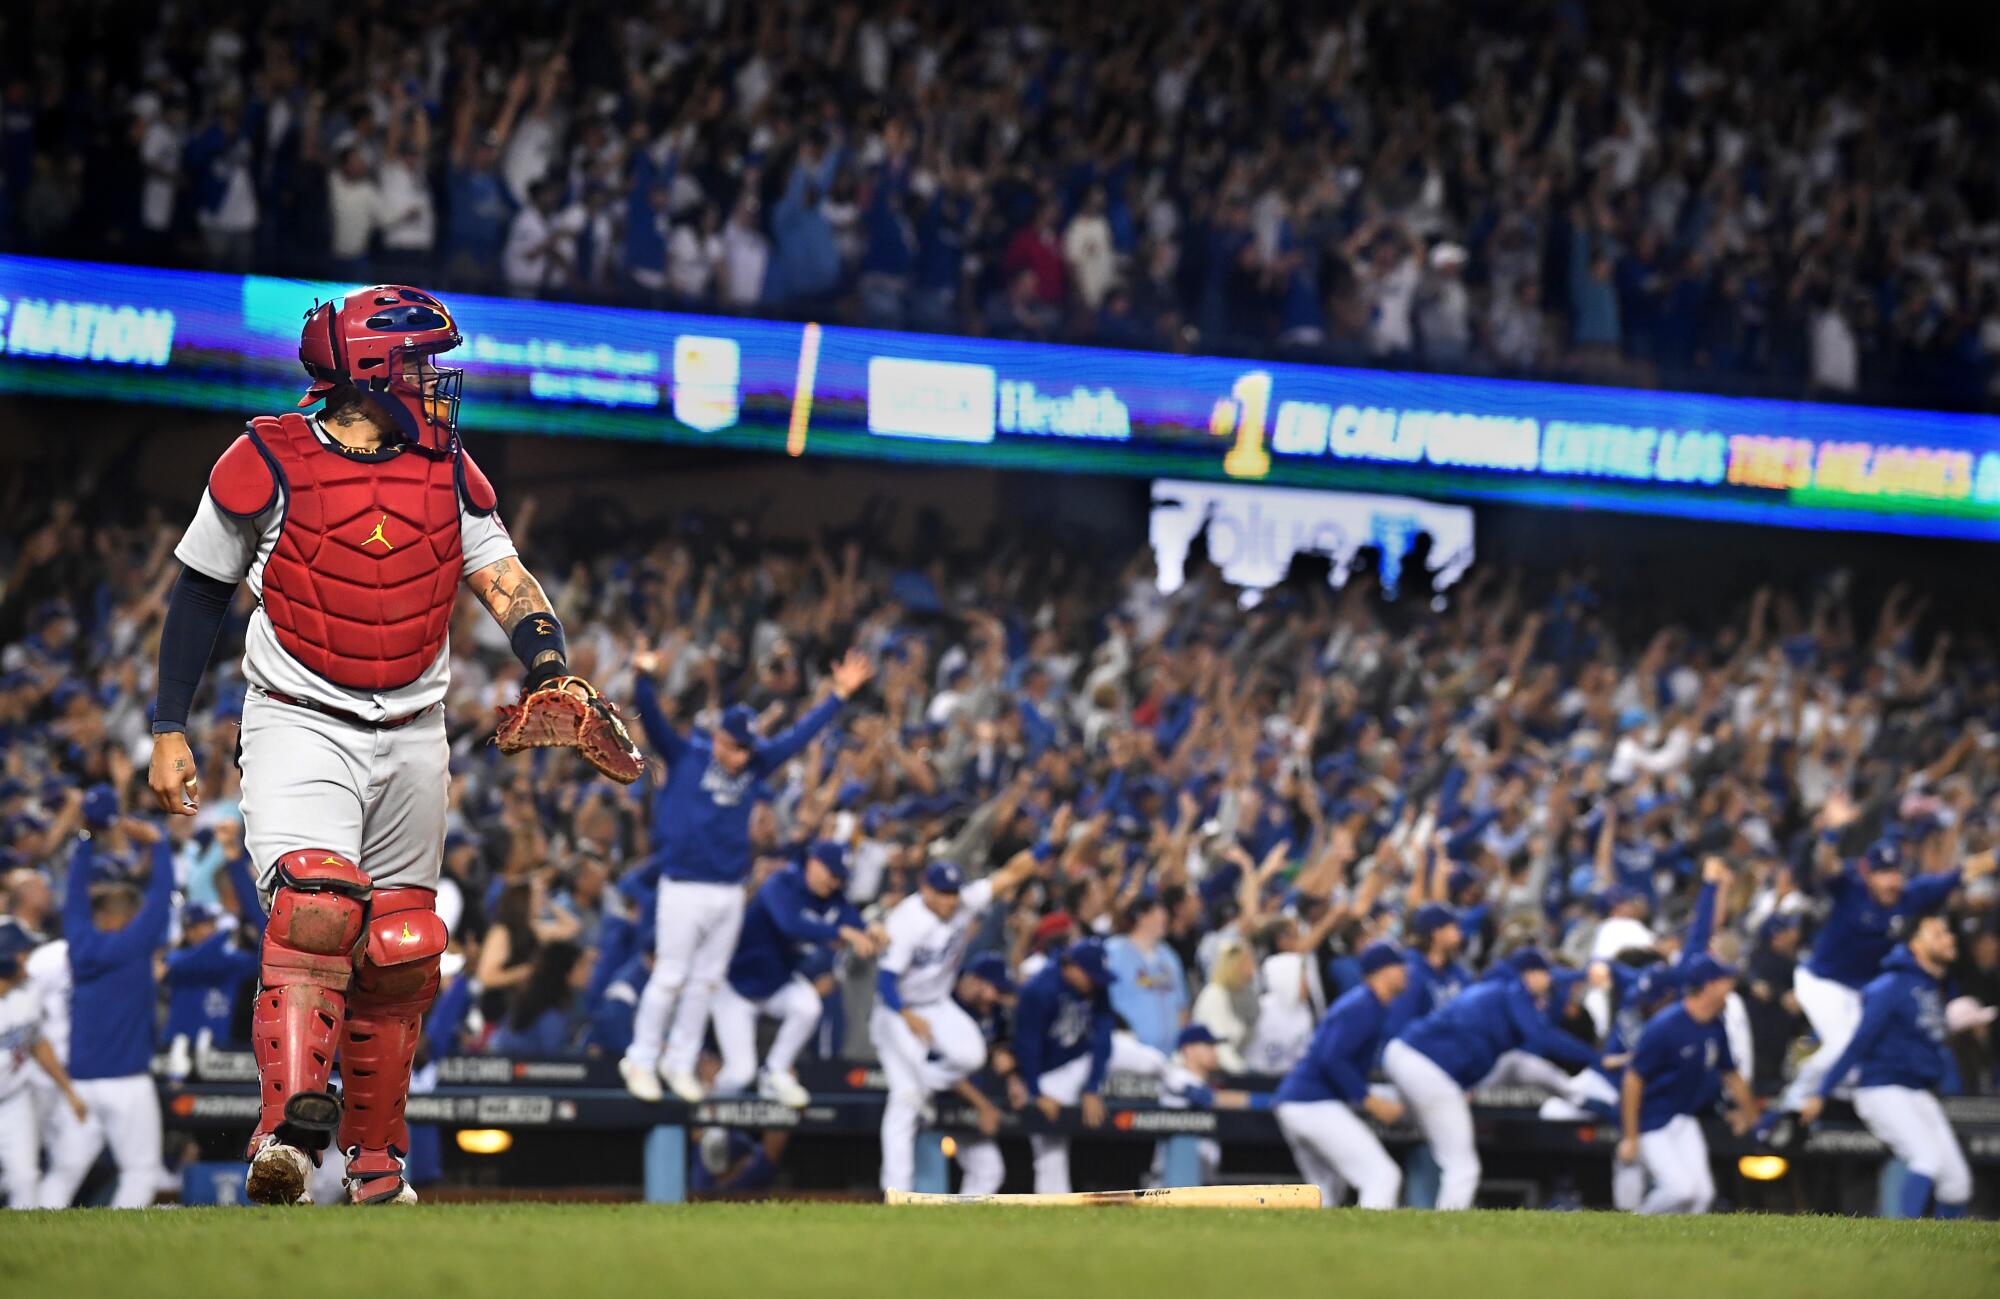 St. Louis Cardinals catcher Yadier Molina walks off the field as the Los Angeles Dodgers celebrate a walk-off home run